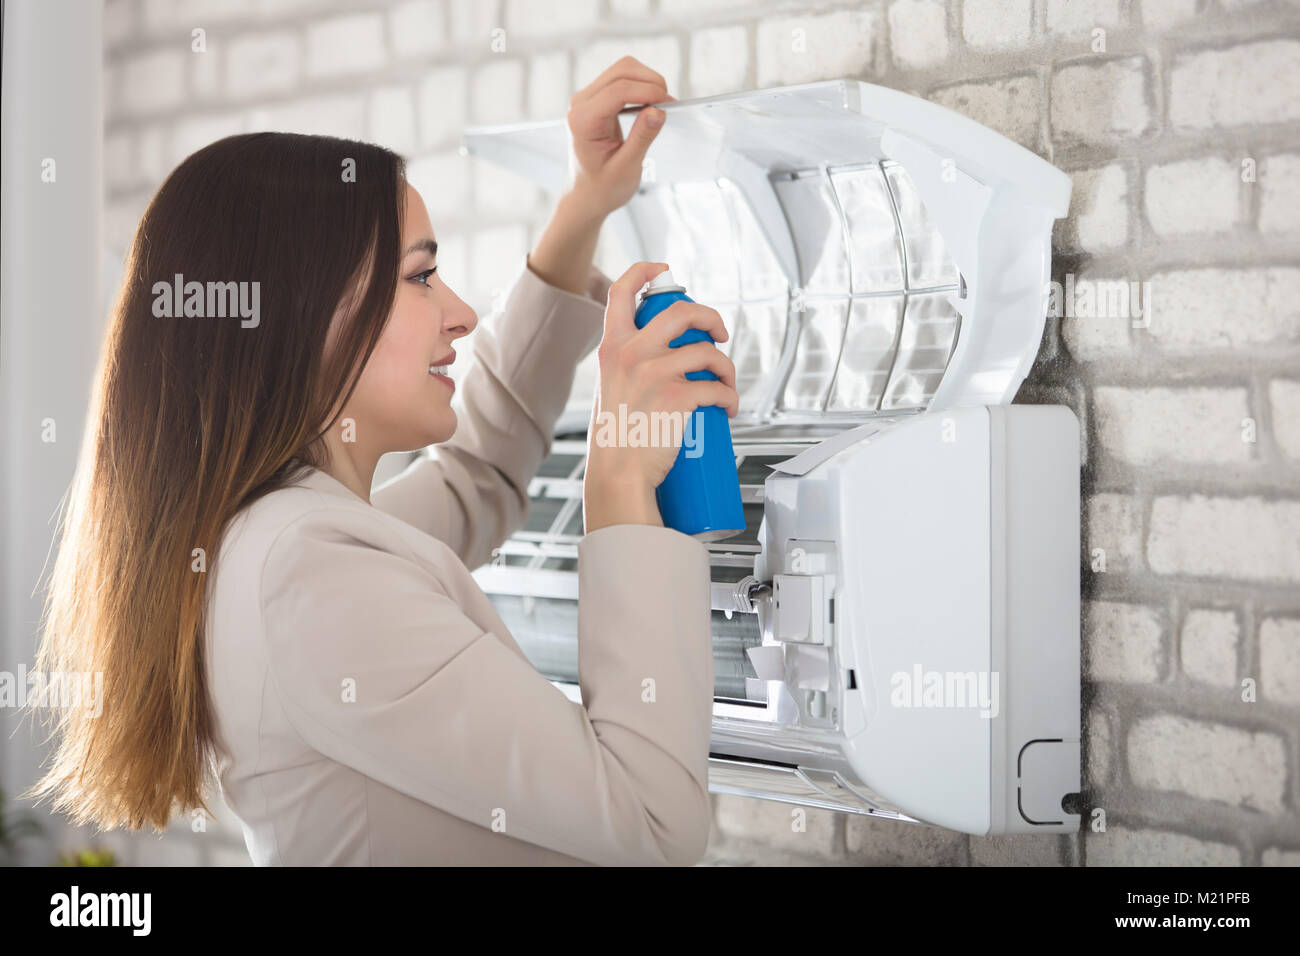 Smiling Young Woman Cleaning The Air Conditioner With Spray Bottle Stock Photo